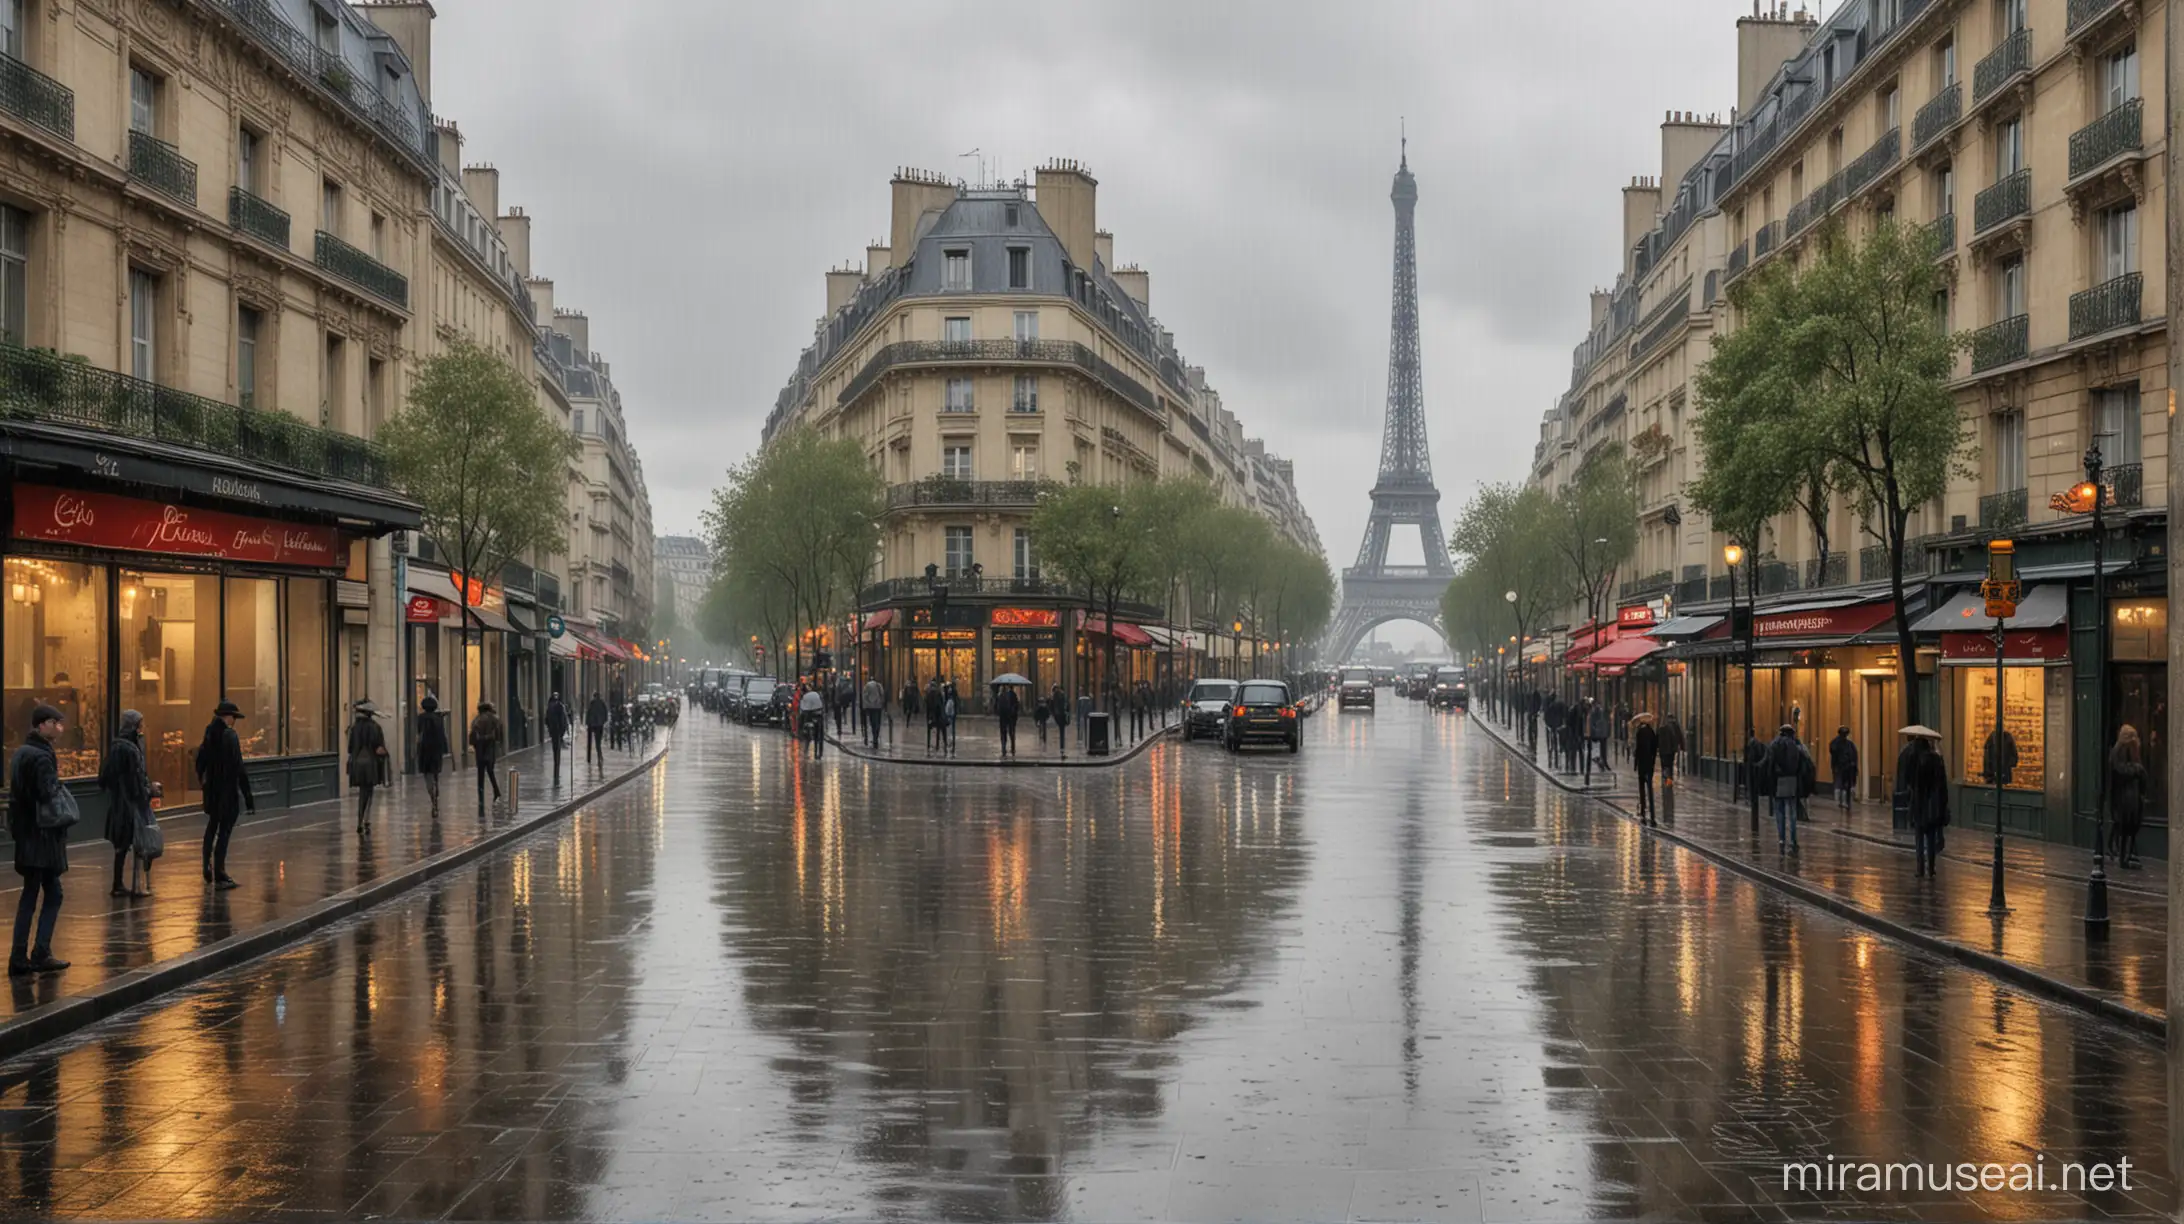 Parisian Landscape on a Rainy Day Inspired by Monet